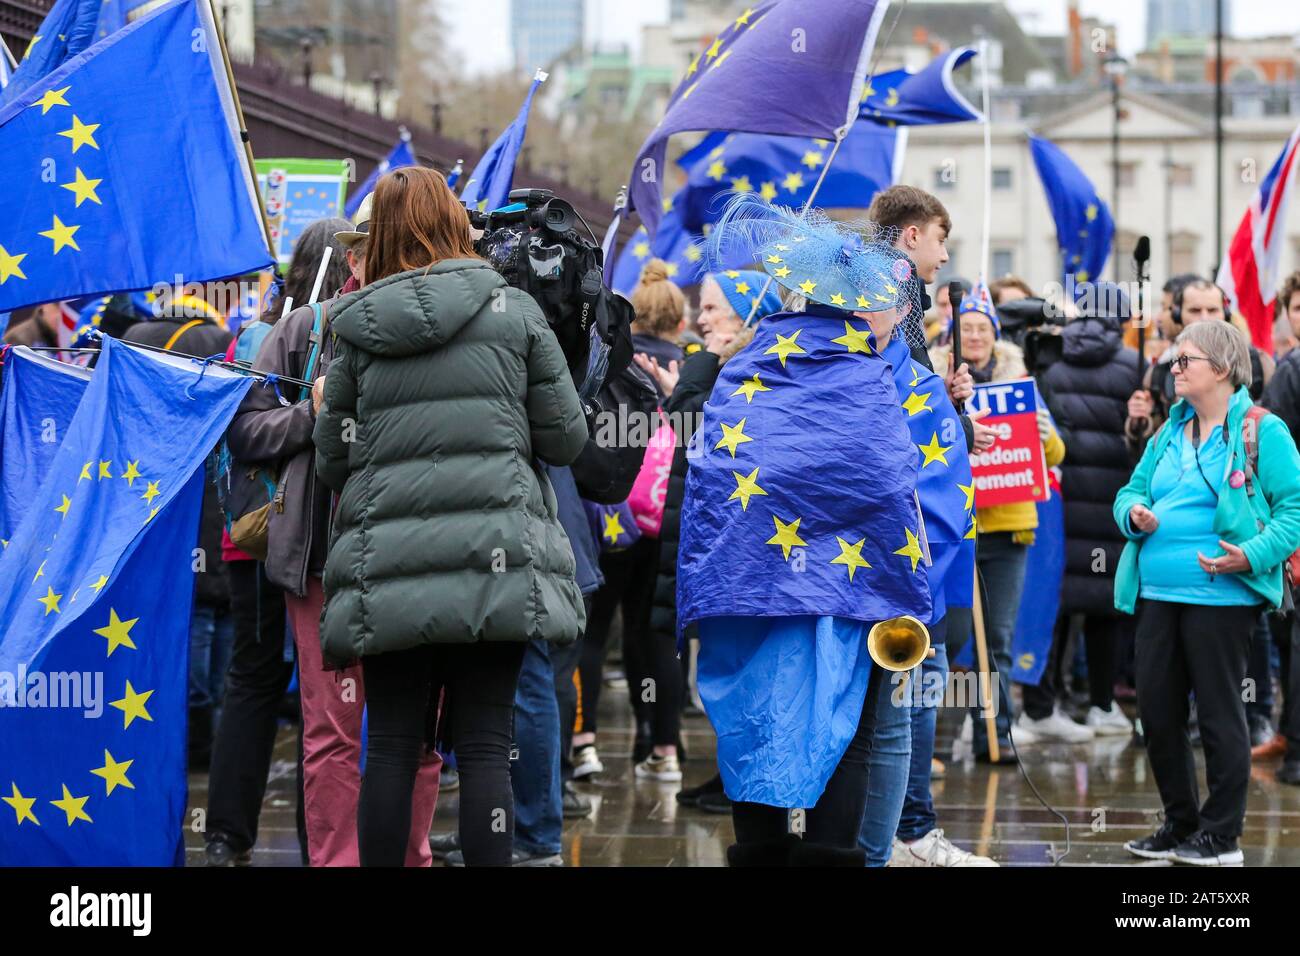 Pro-remain supporters holding EU flags protest outside Houses of Parliament on the eve of Brexit Day.Pro-remain supporters with EU flags protest outside Houses of Parliament on the eve of Brexit Day. Britain will officially leave the European Union at 11pm (GMT) on 31 January 2020 and will cease to be a state member. Under the terms of the Withdrawal Agreement, UK will enter a transitional period and will abide by EU rules despite not being a member. Stock Photo